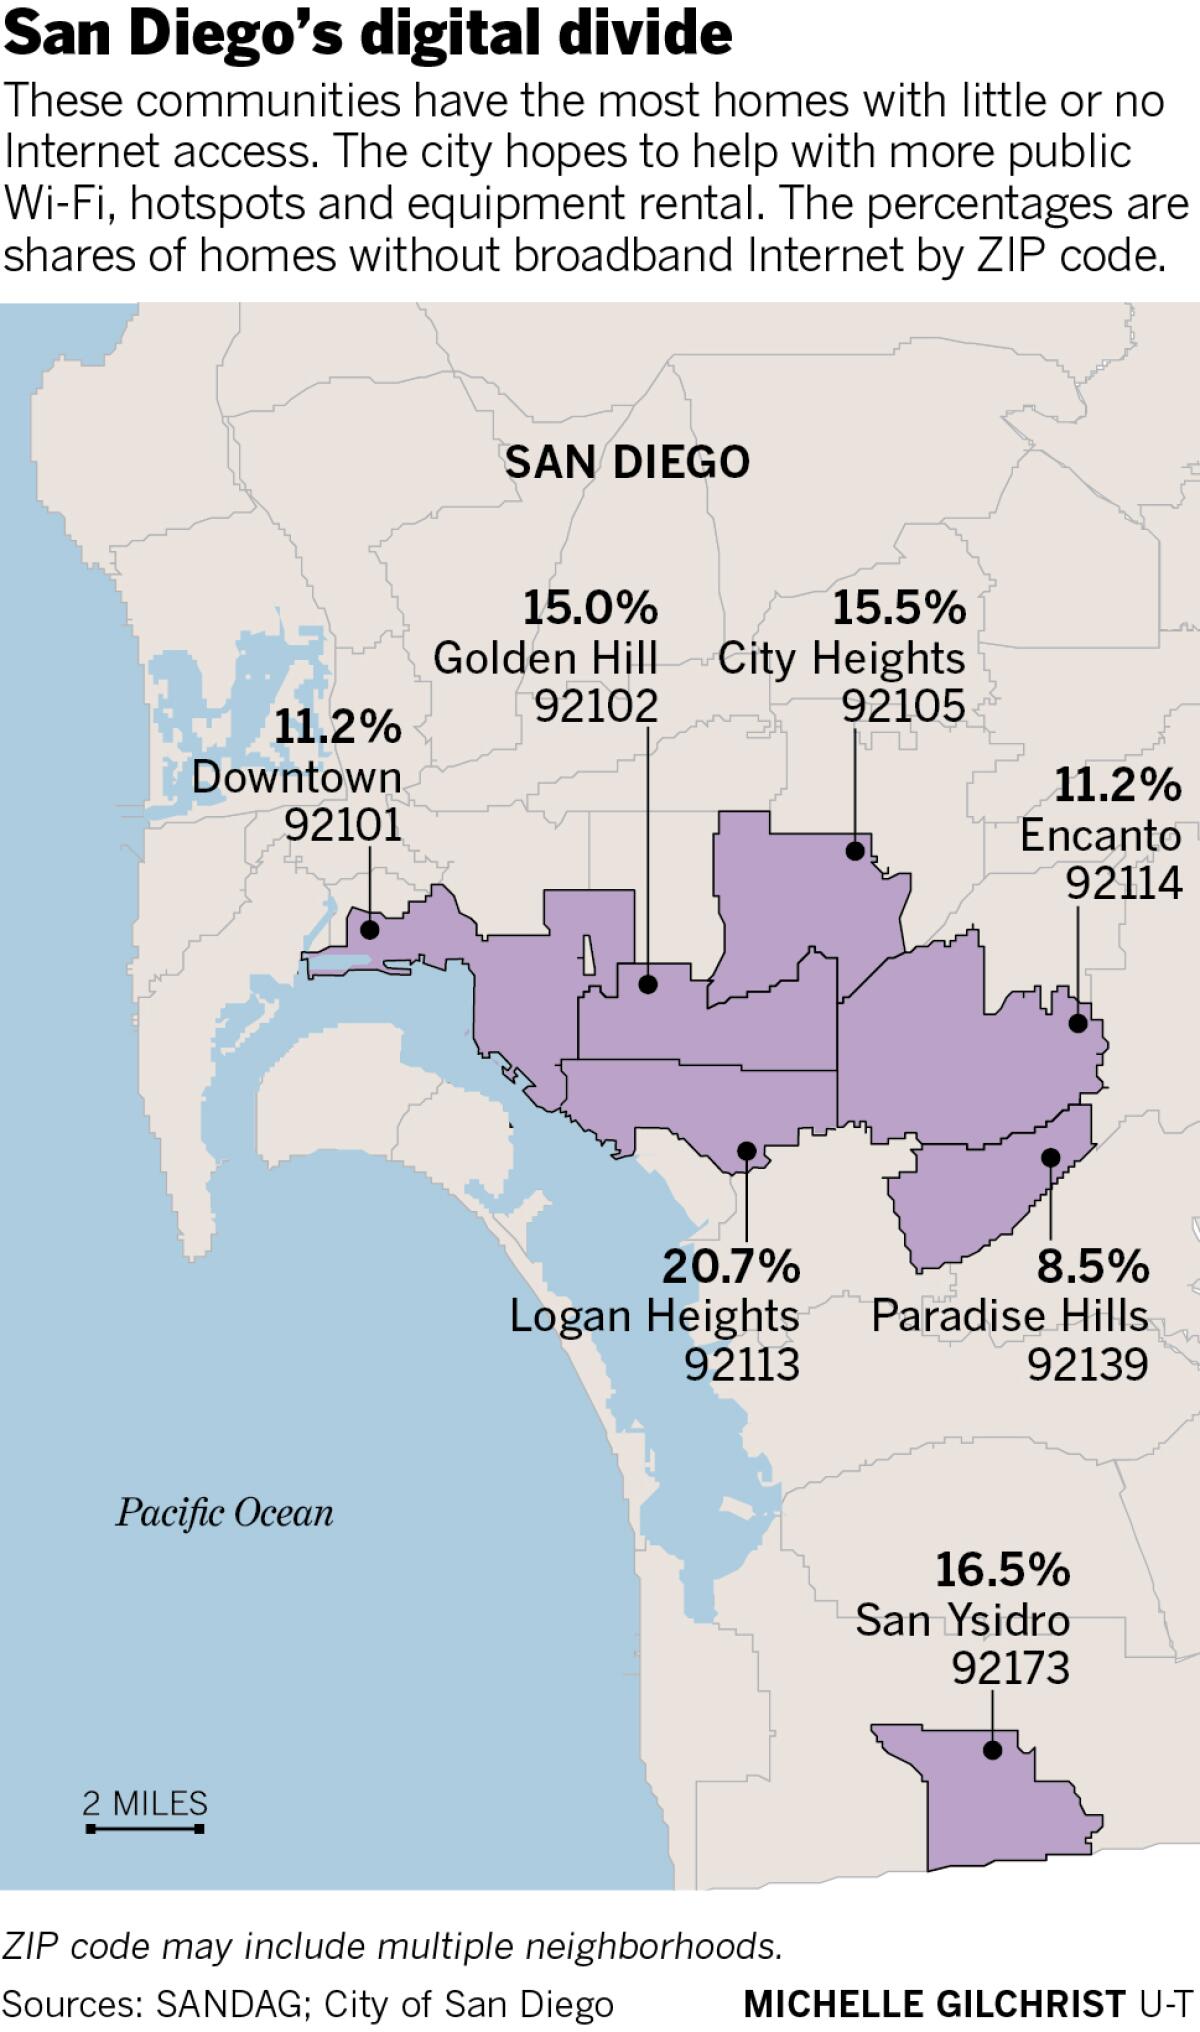 San Diego's digital divide; ZIP codes in the city with the most homes with no internet access 